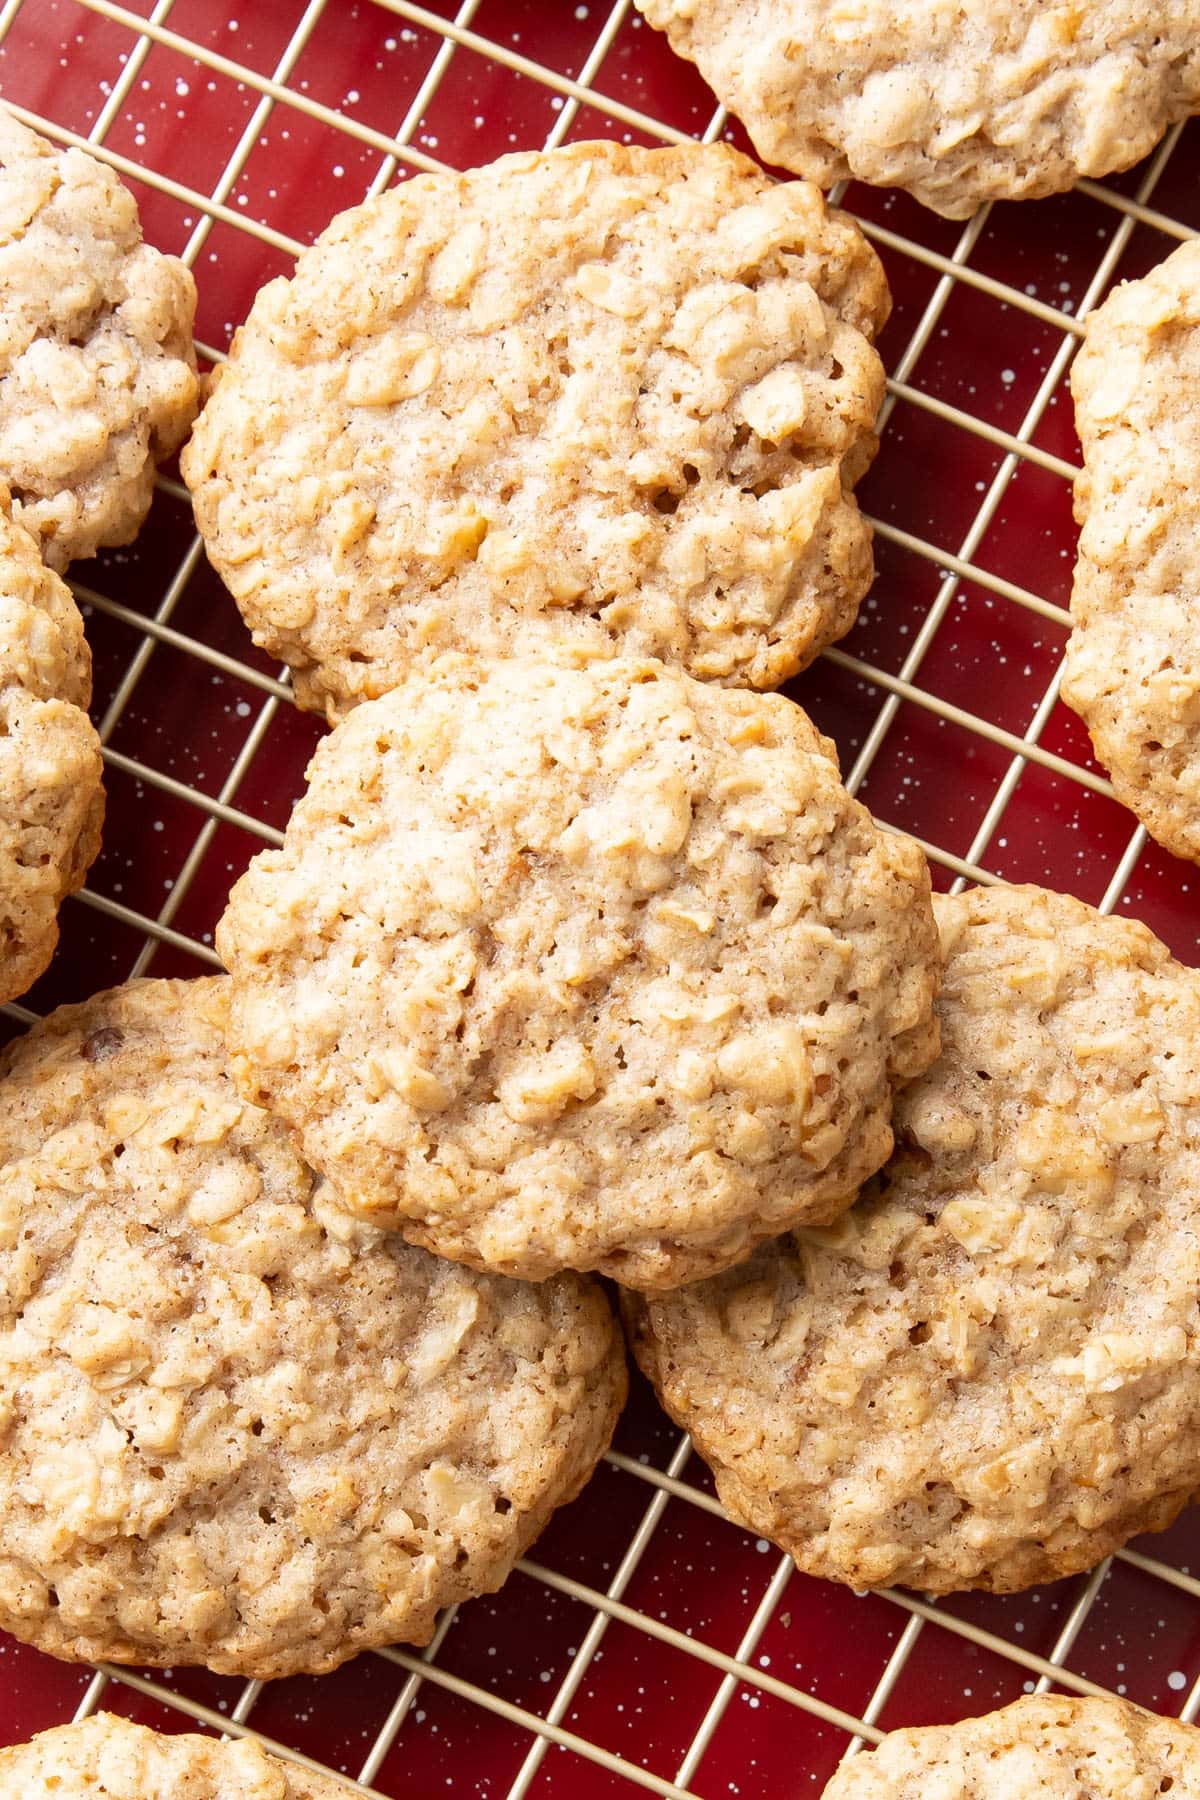 Close up of baked good to showcase texture of oats, crisp edges, and chewy centers